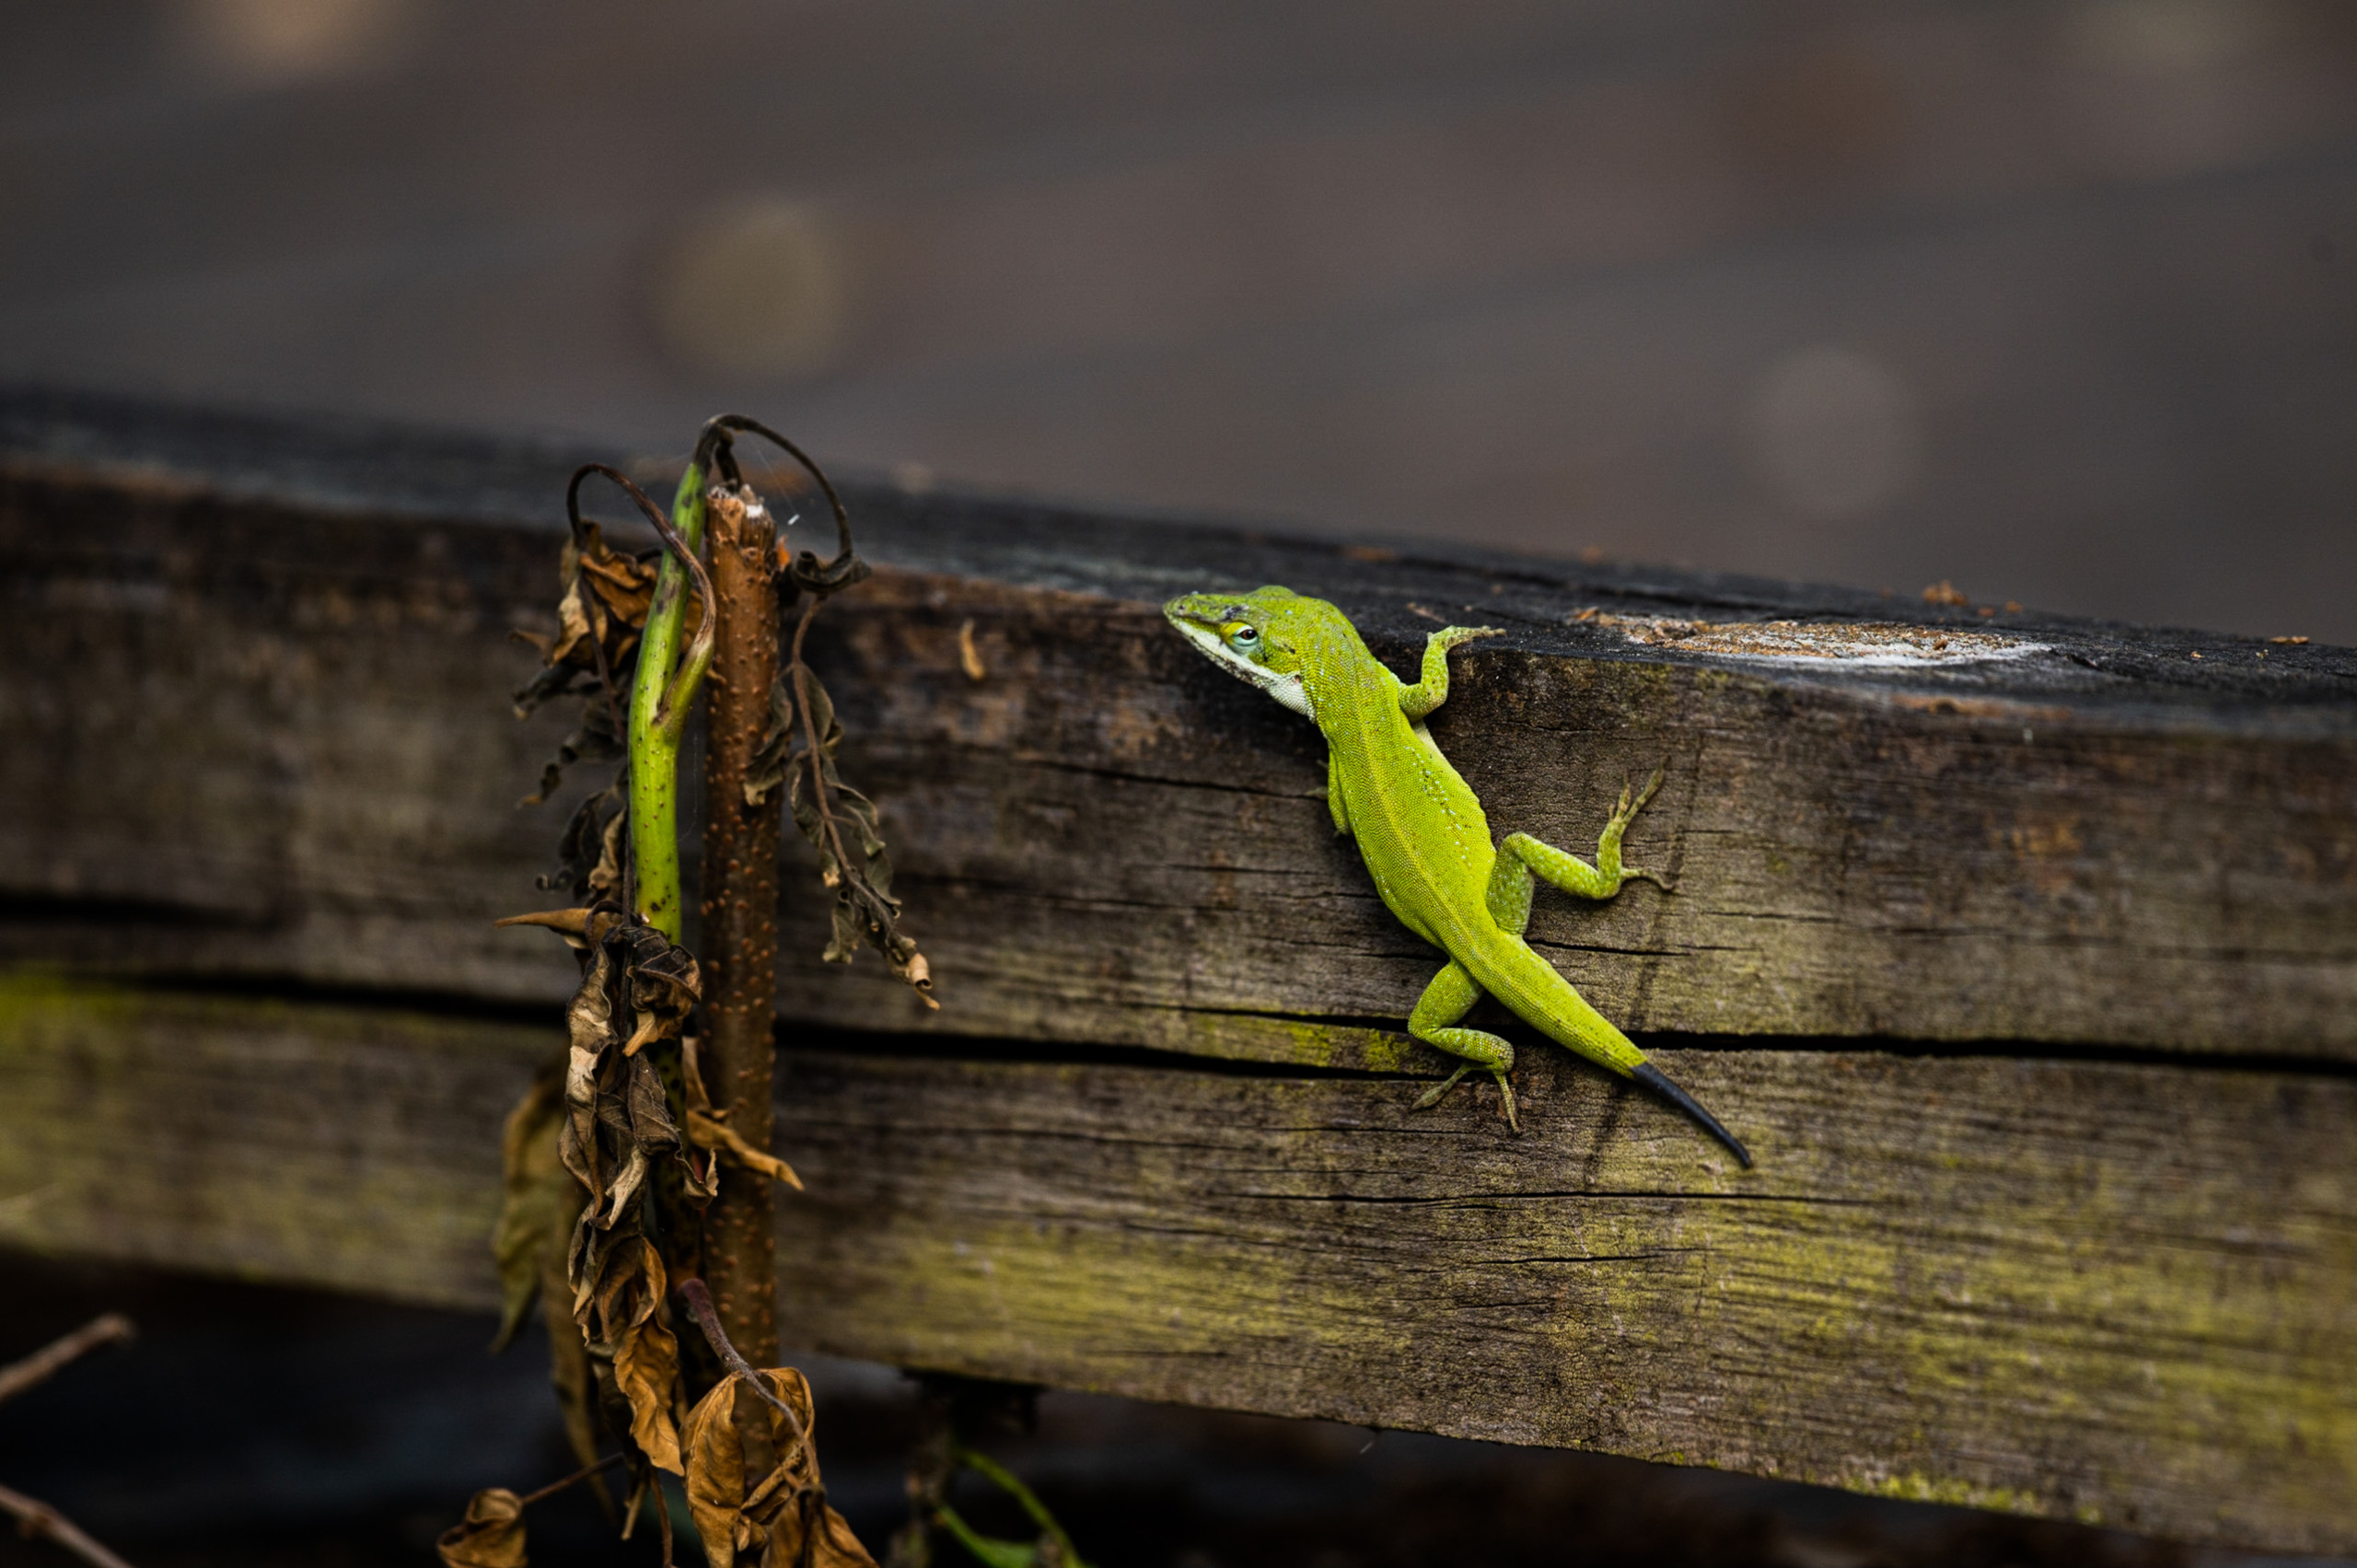 Green lizard with a newly-regrown tail